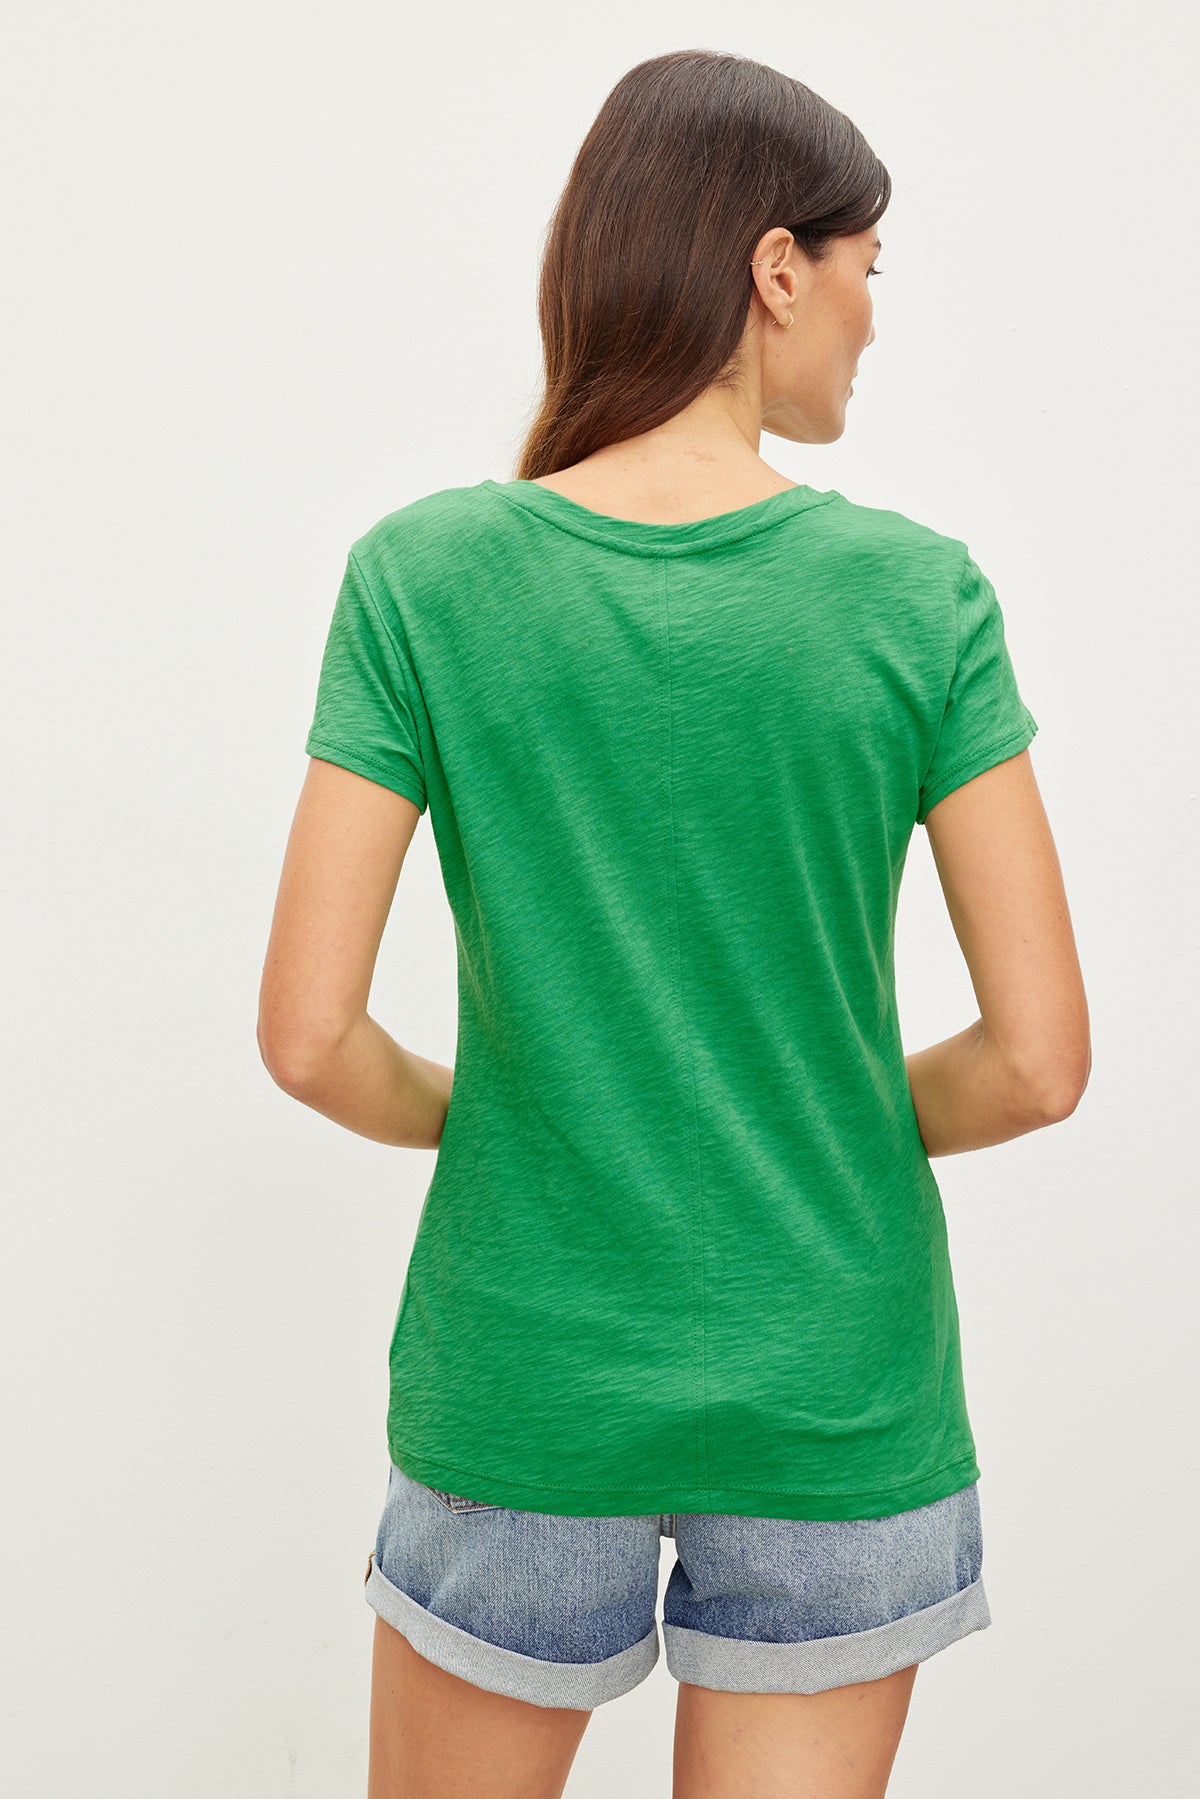 The back view of a woman wearing a Velvet by Graham & Spencer ODELIA COTTON SLUB CREW NECK TEE.-35982937850049